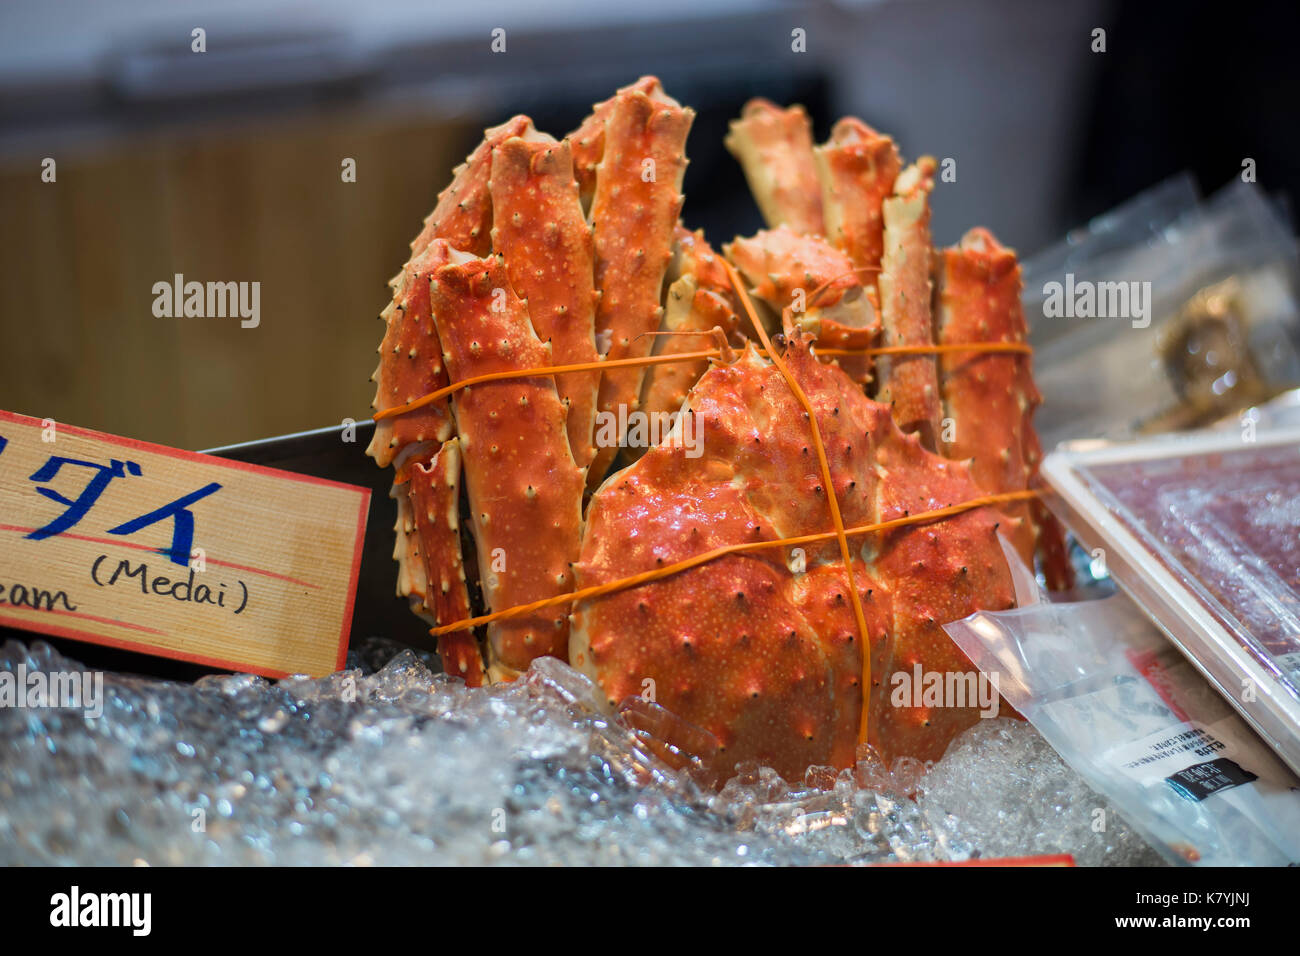 King crab displayed in a fresh market with Japanese sign. Stock Photo